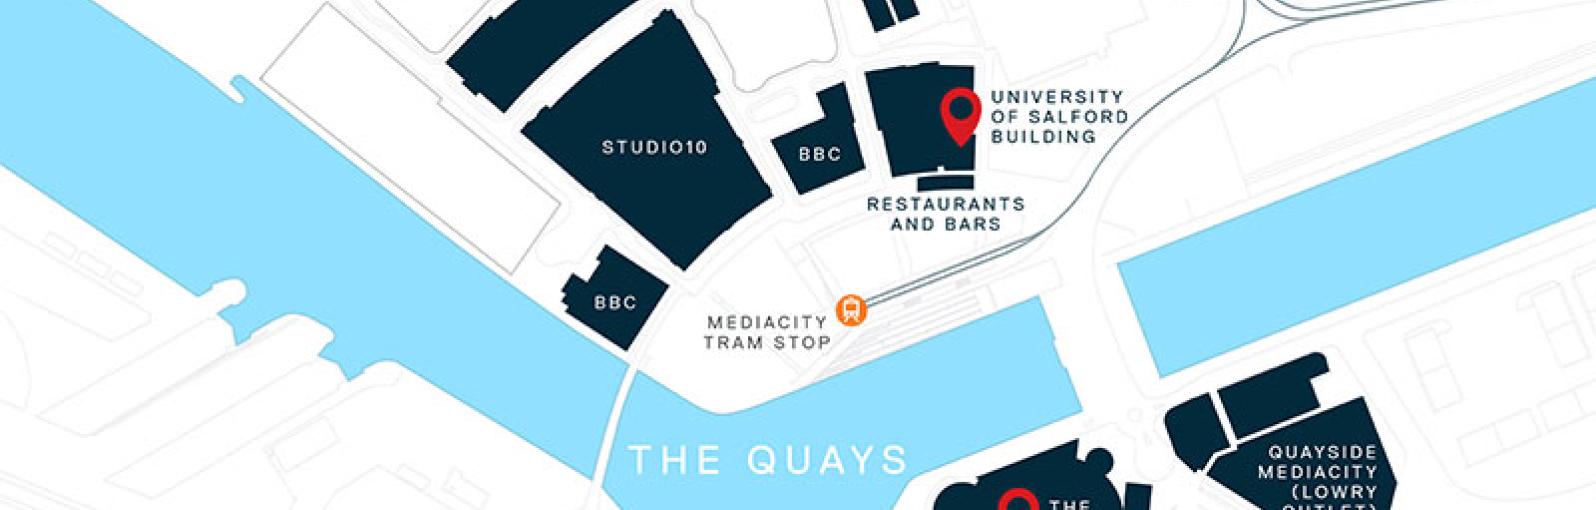 Map of MediaCity, showing location of University building and The Lowry